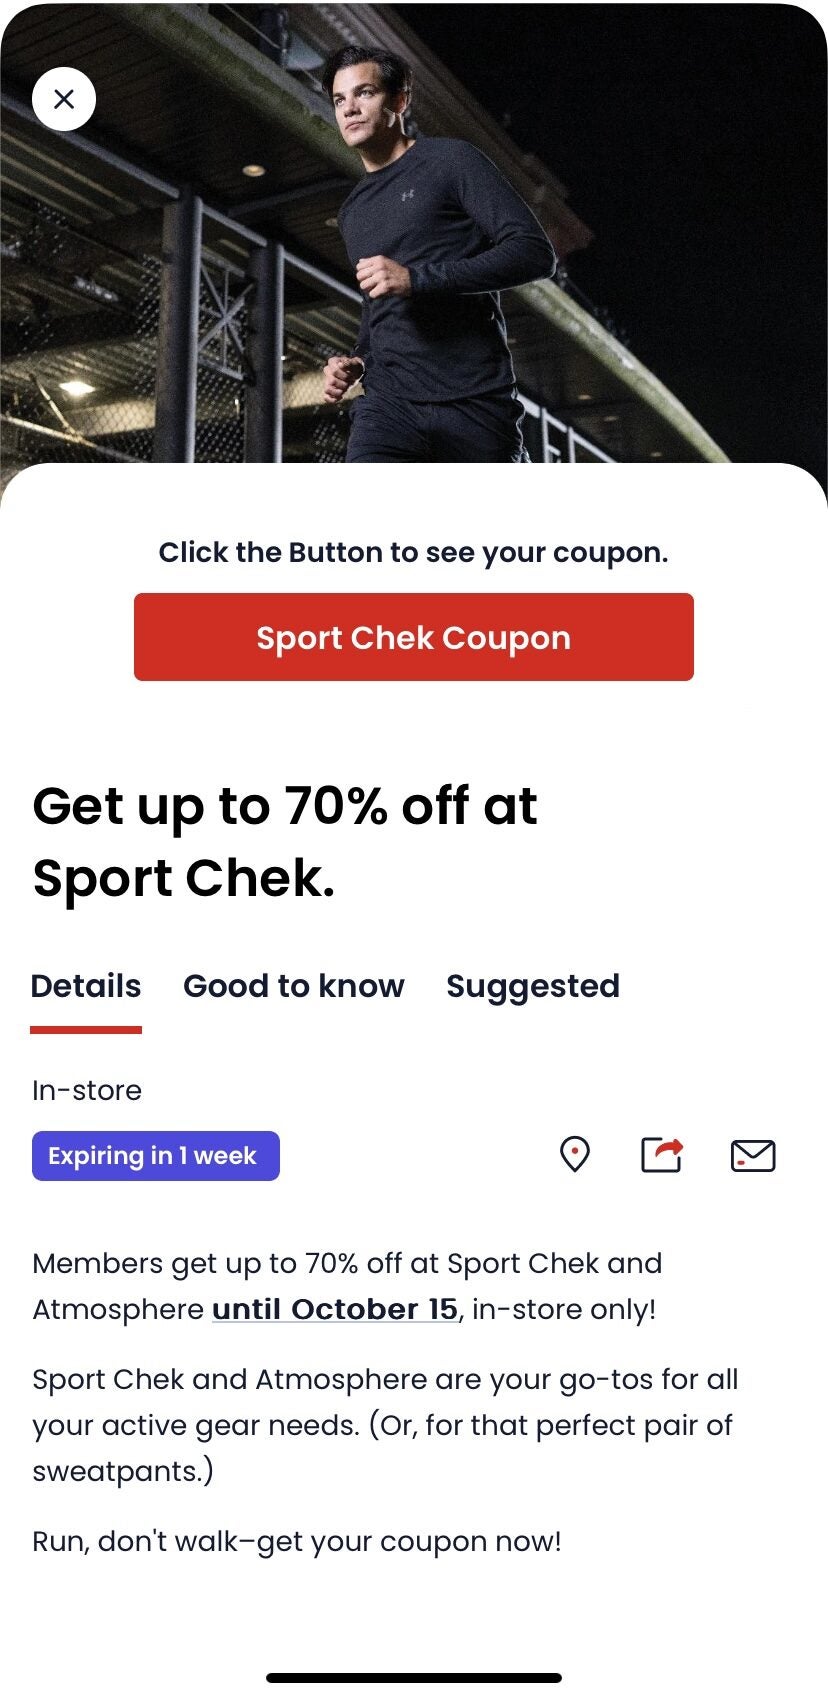 Sport Chek] Exclusive VIP Pricing Up to 70% Oct 5-15 (Virgin Plus